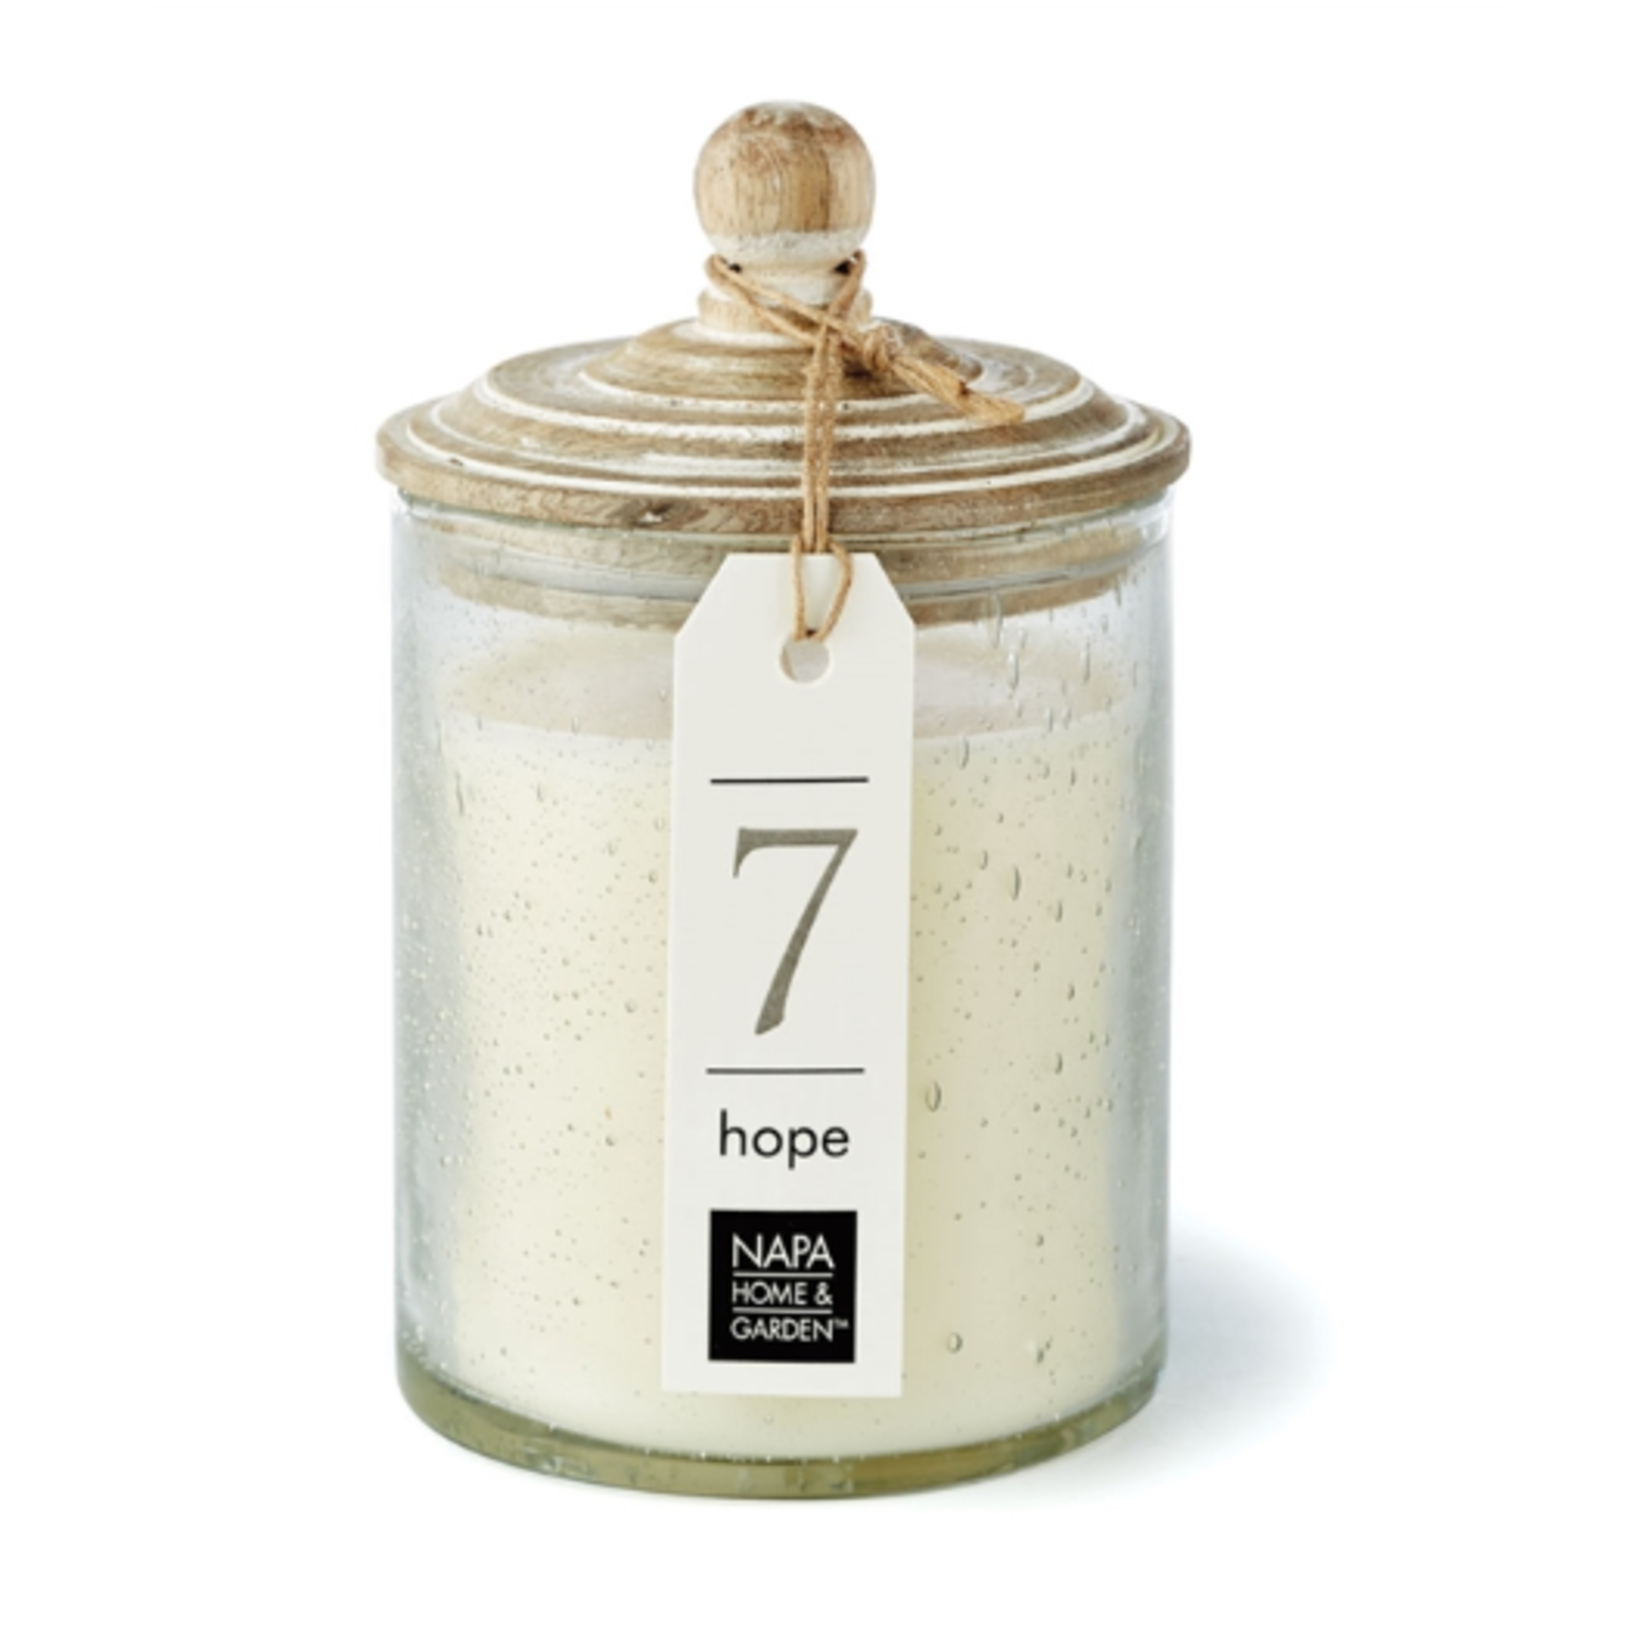 Napa Home and Garden Hope #7 Gray Oak Soy Candle